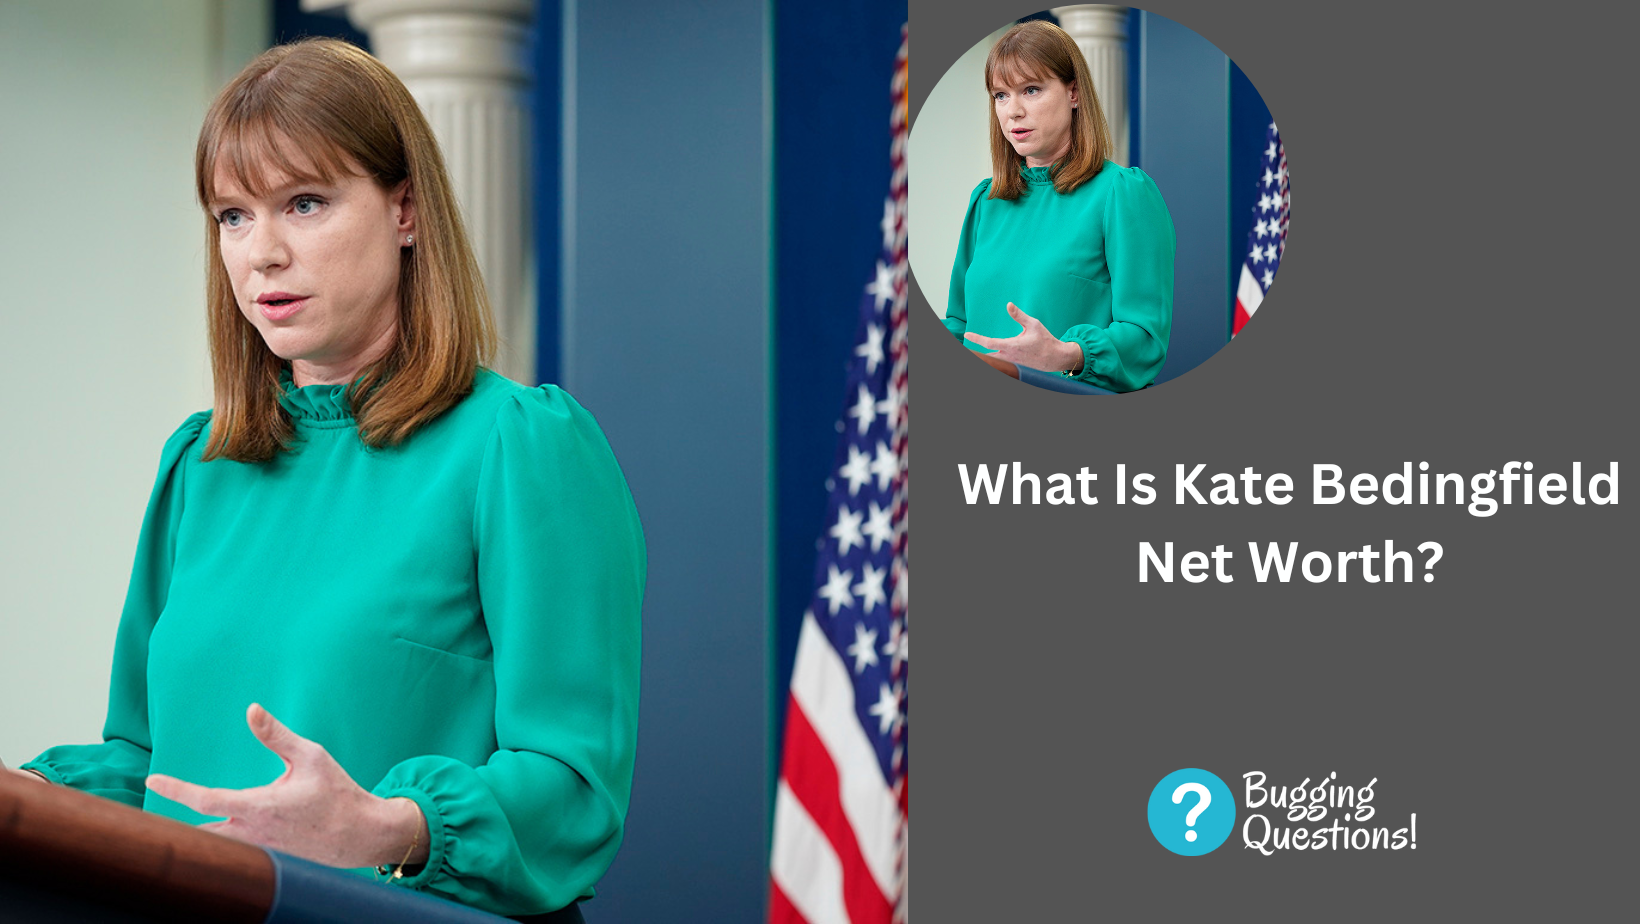 What Is Kate Bedingfield Net Worth?